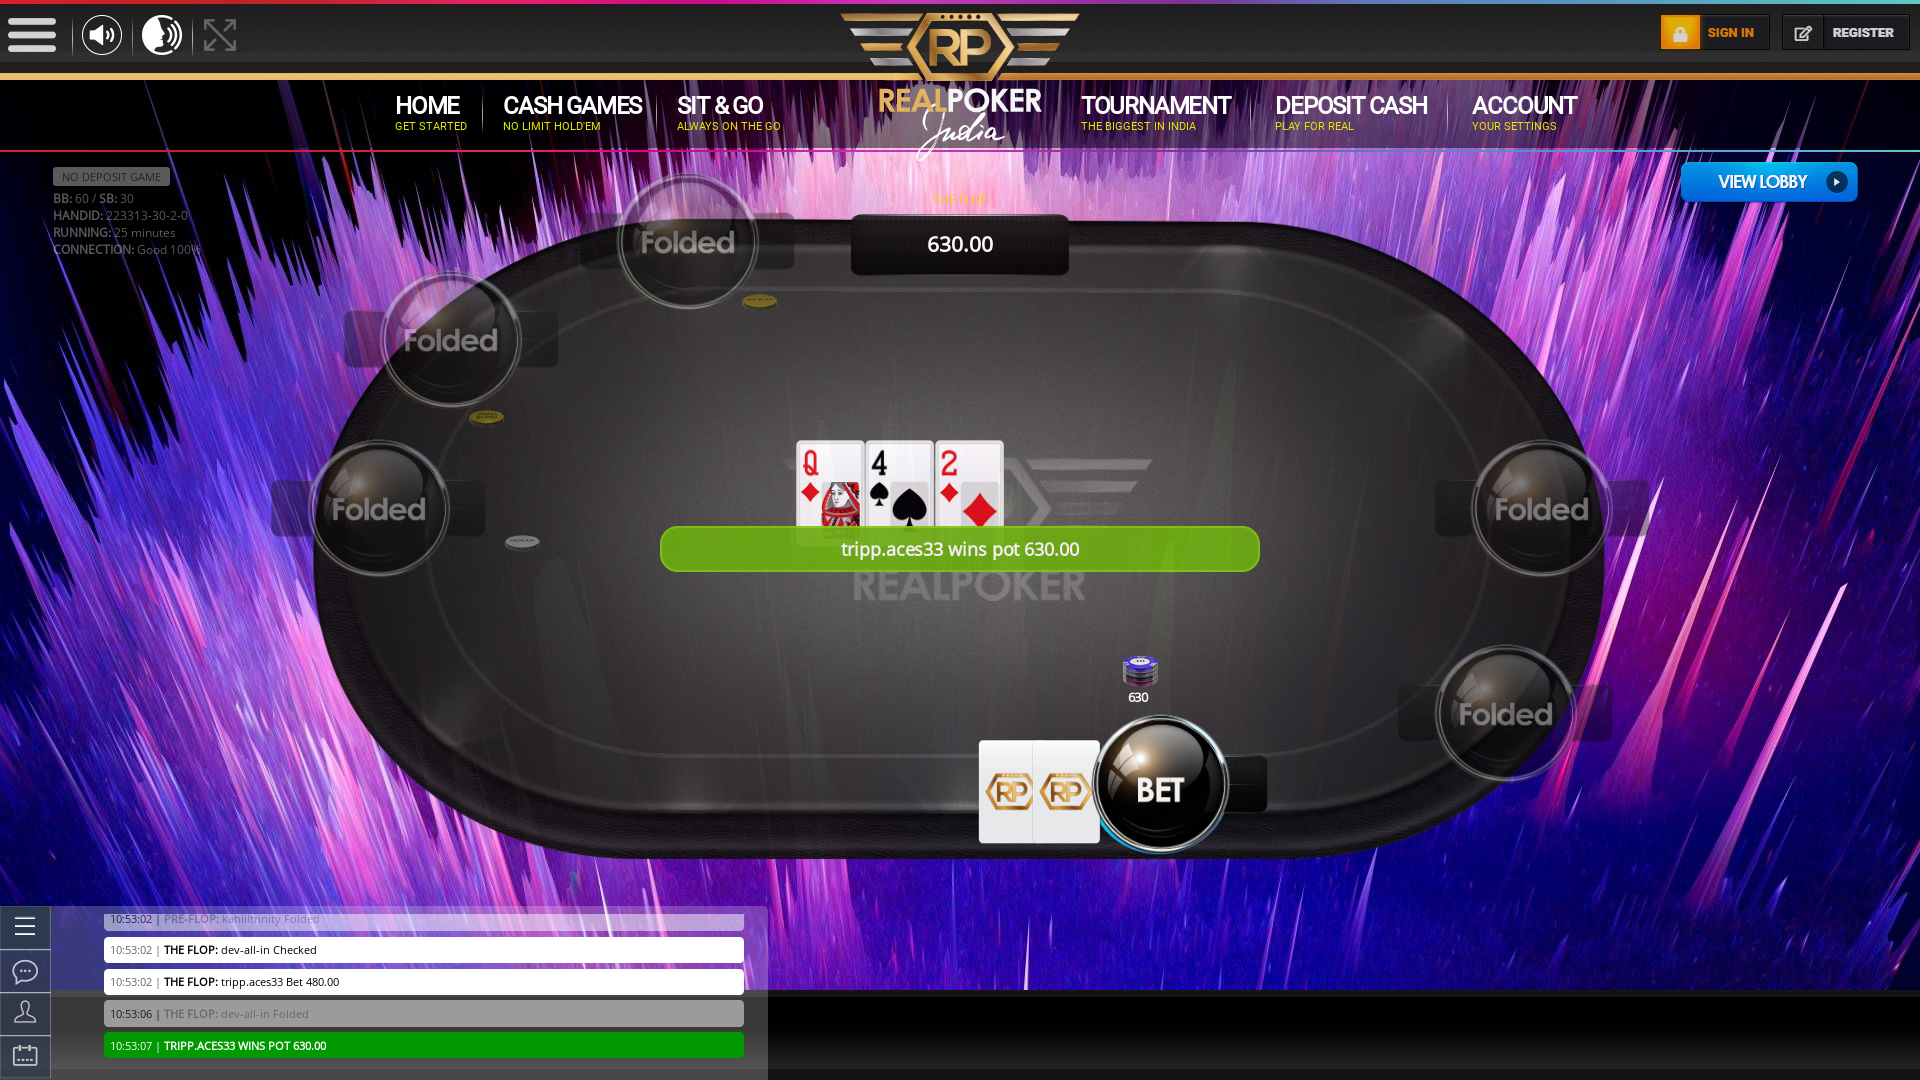 Indian 10 player poker in the 24th minute